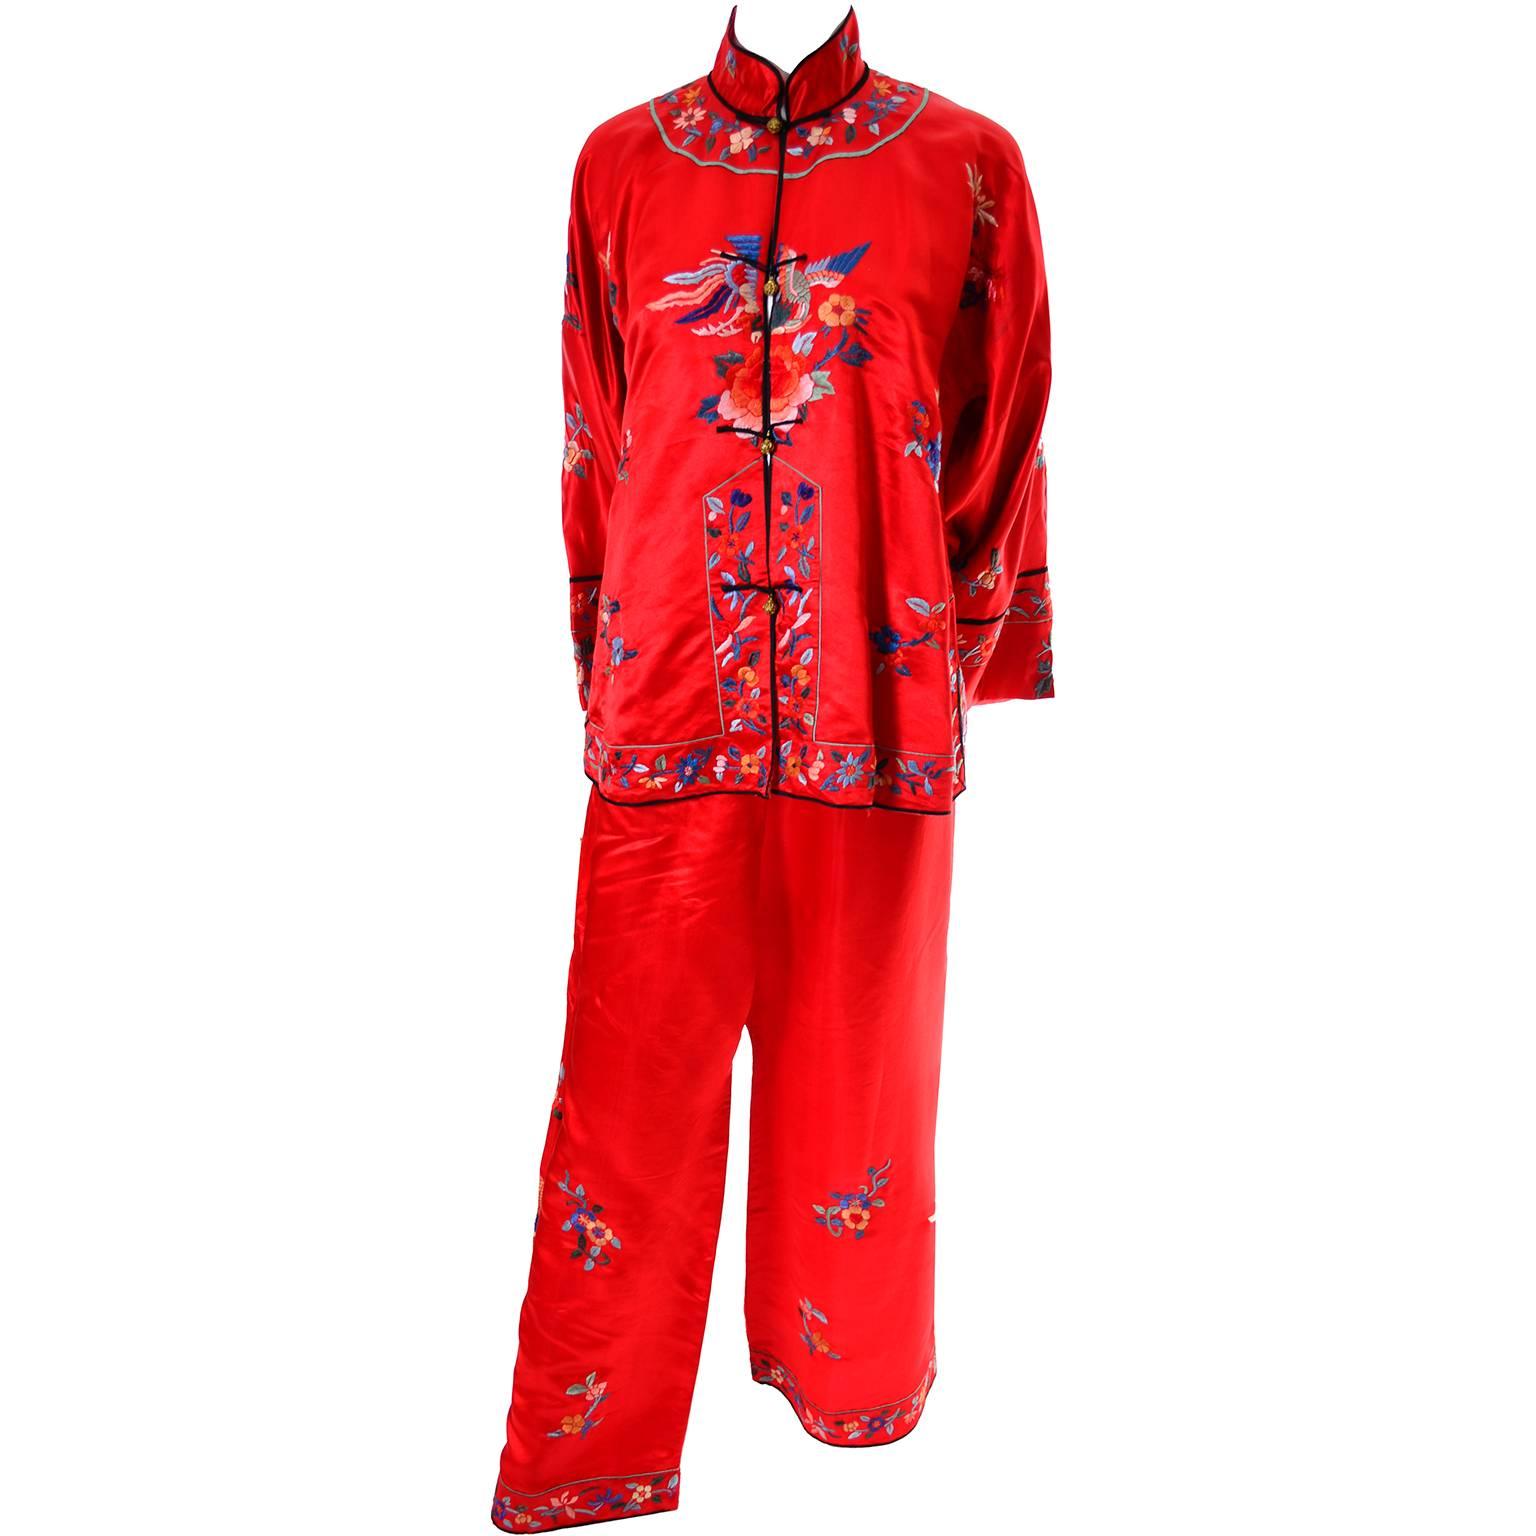 1940s Vintage Chinese Pajamas Red Silk Embroidered Top and Bottoms